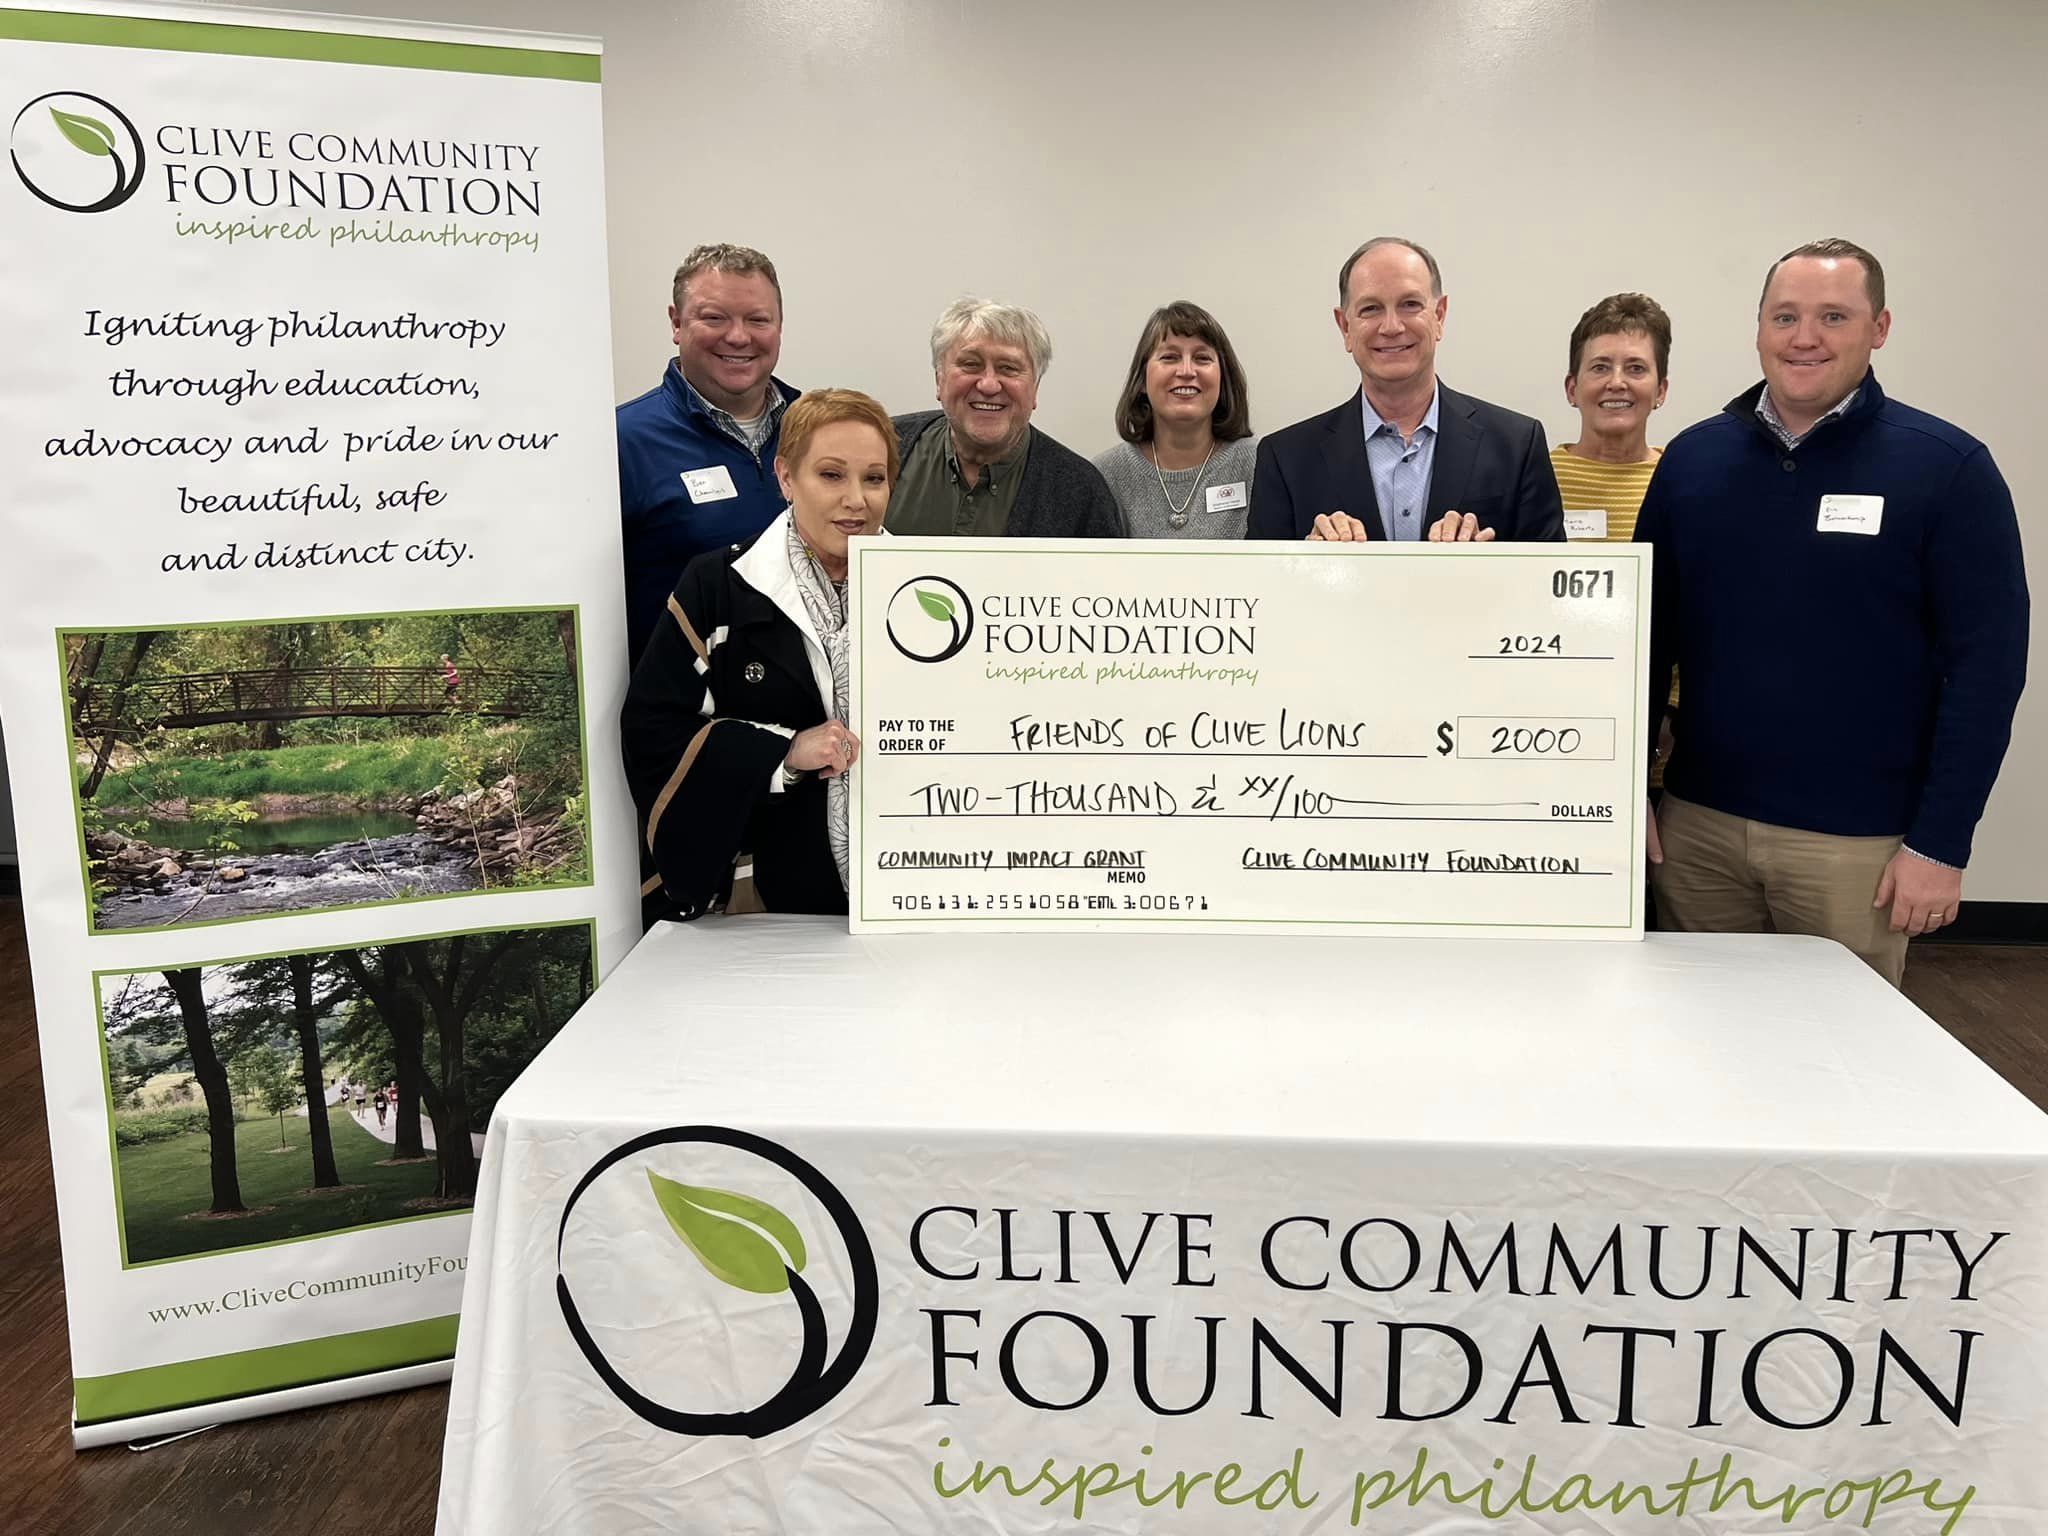 Grant money being received from Clive Community Foundation